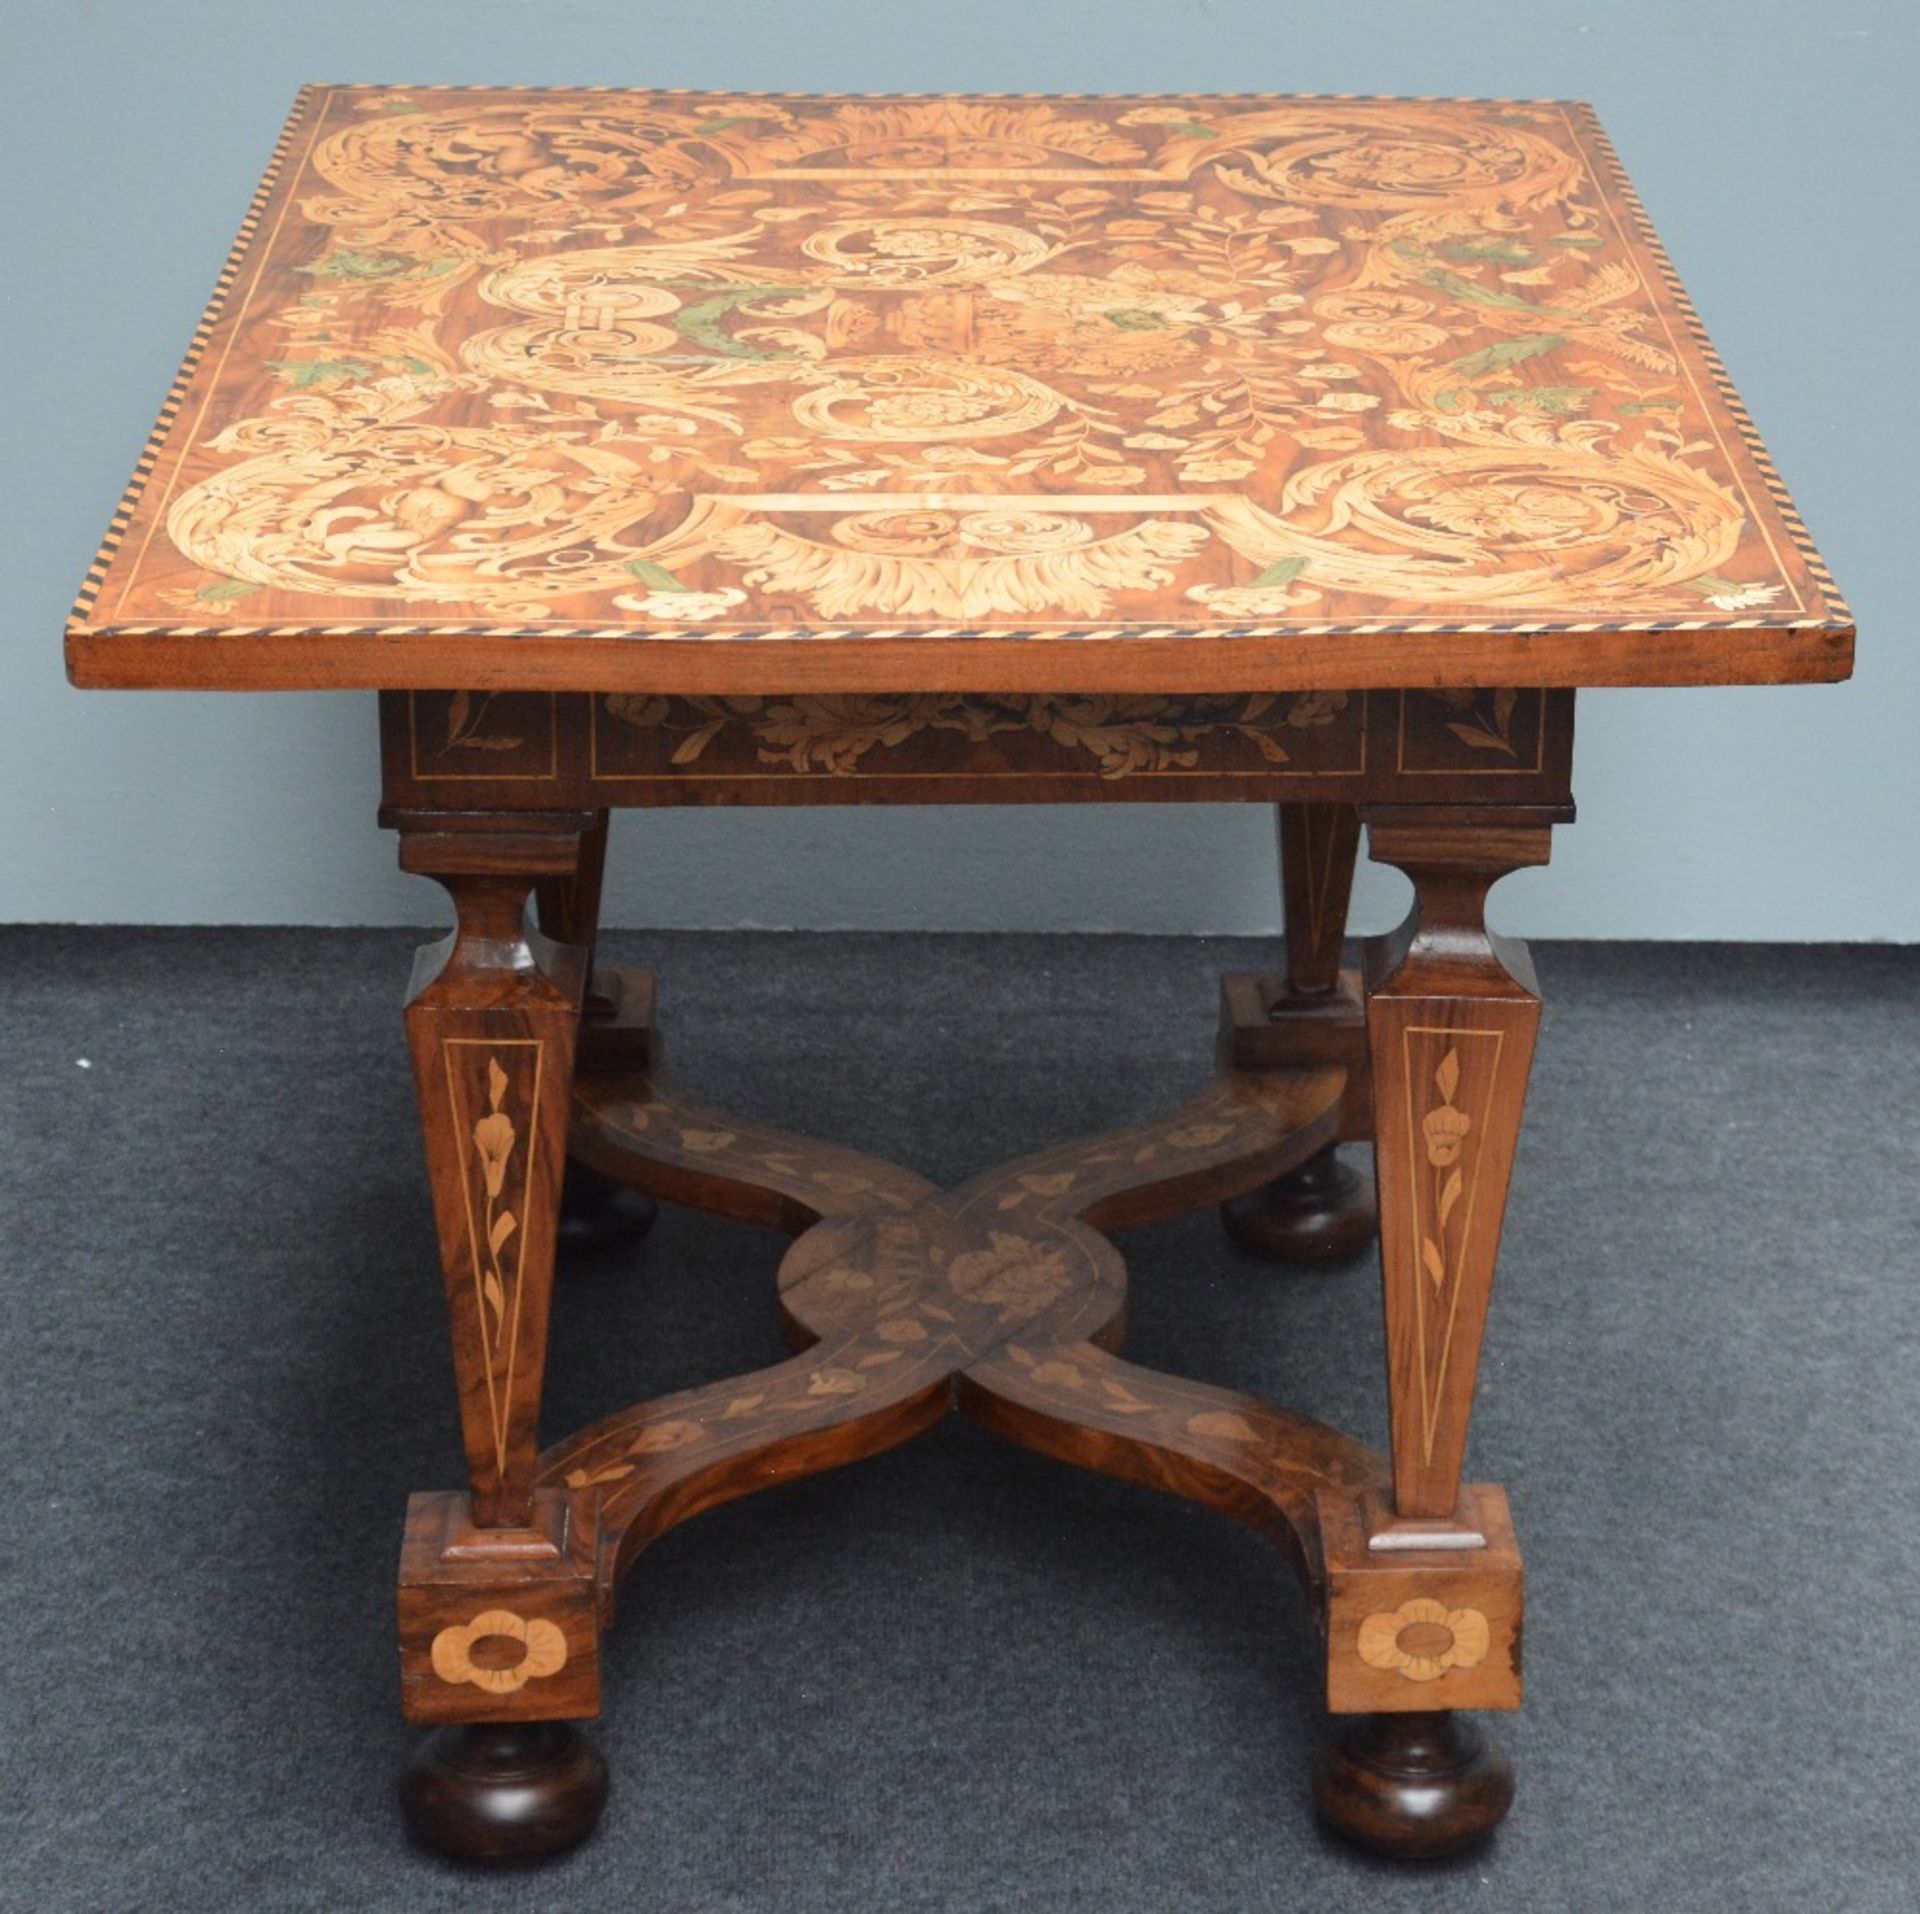 An exceptional LXIV-style Dutch writing desk with walnut veneer and marquetry, early 18thC; added - Bild 4 aus 11